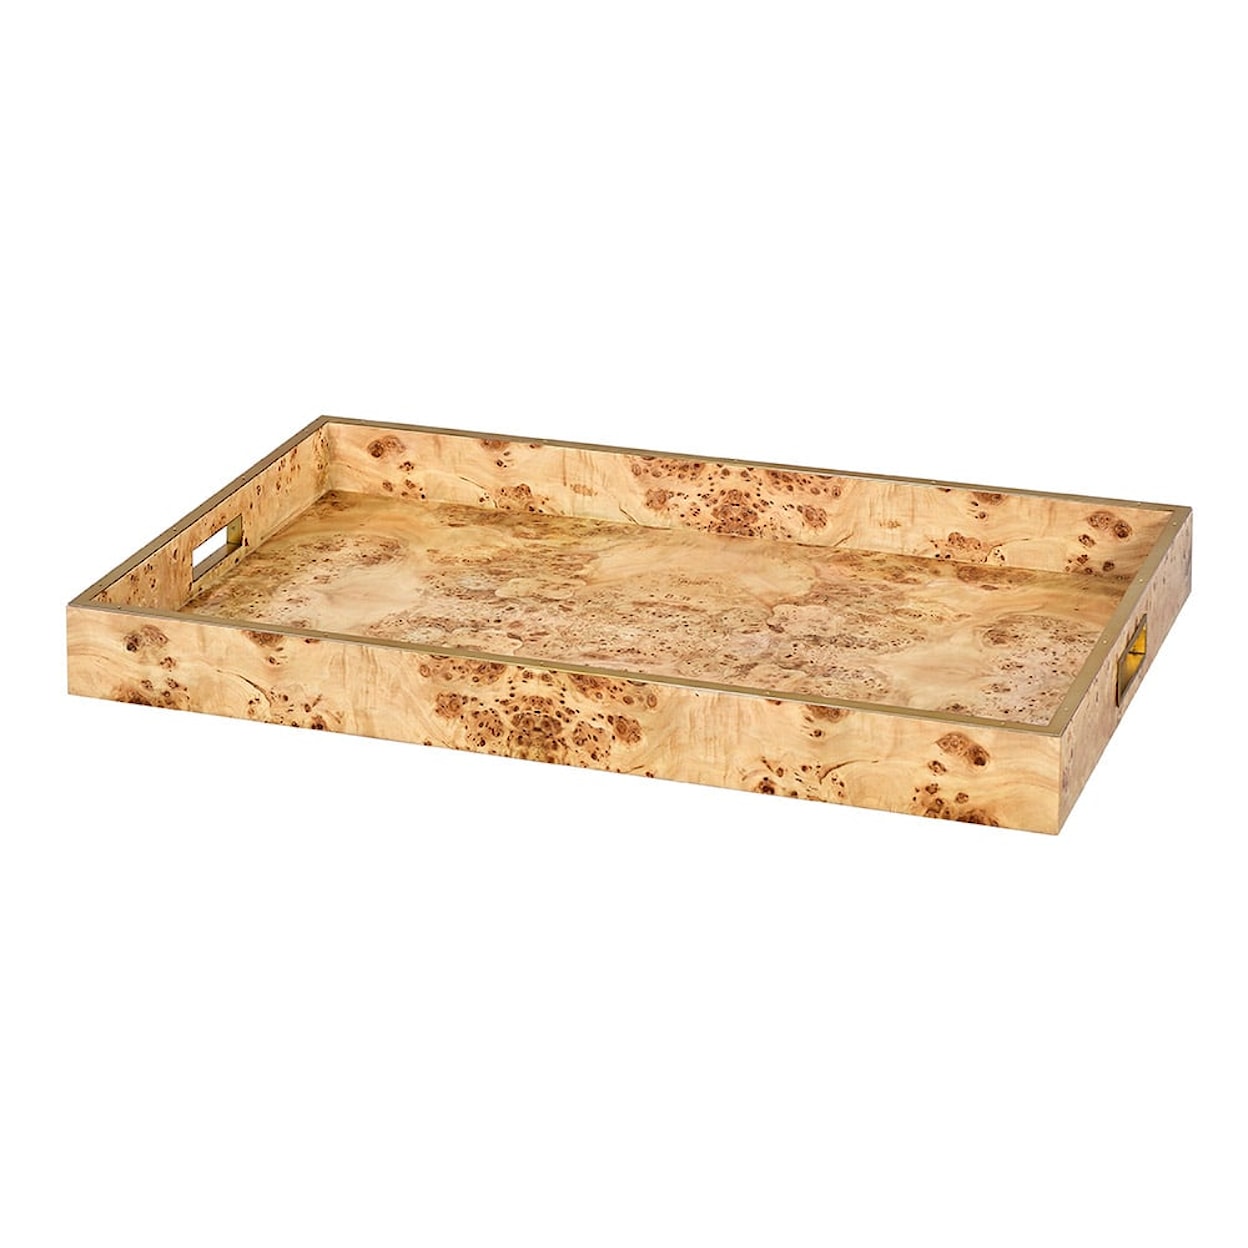 Oliver Home Furnishings Trays MILO TRAY- NATURAL BURL